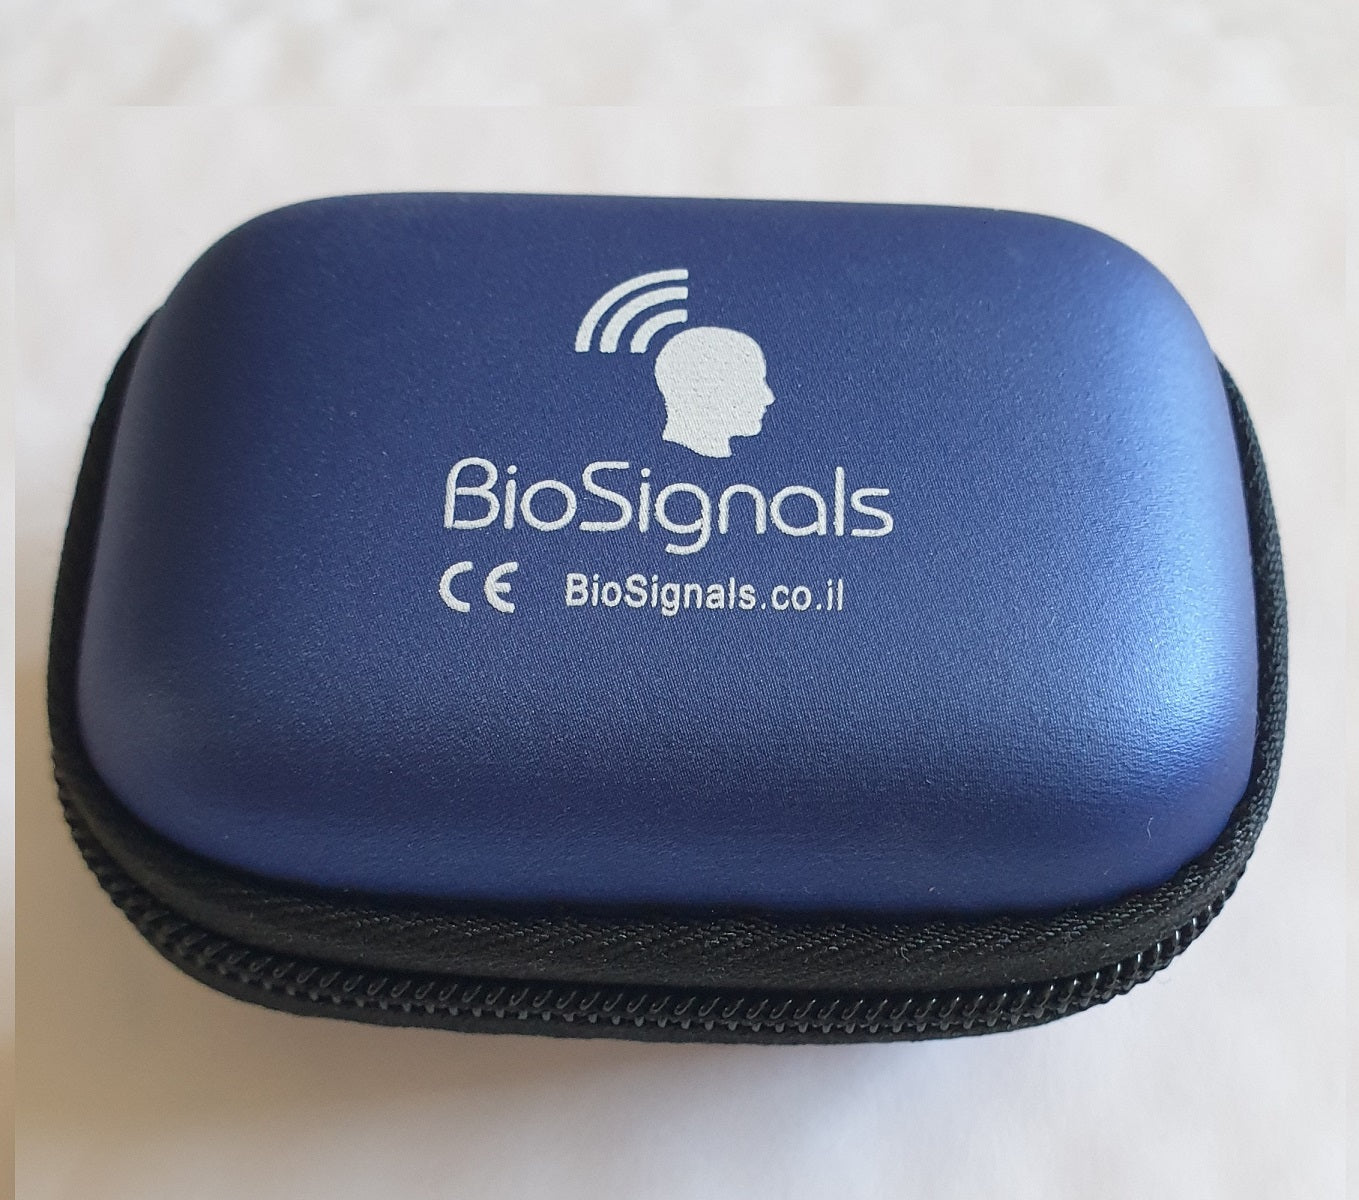 Biofeedback AI-HRV one finger PPG wireless sensor. Professional product for clinical or home use.